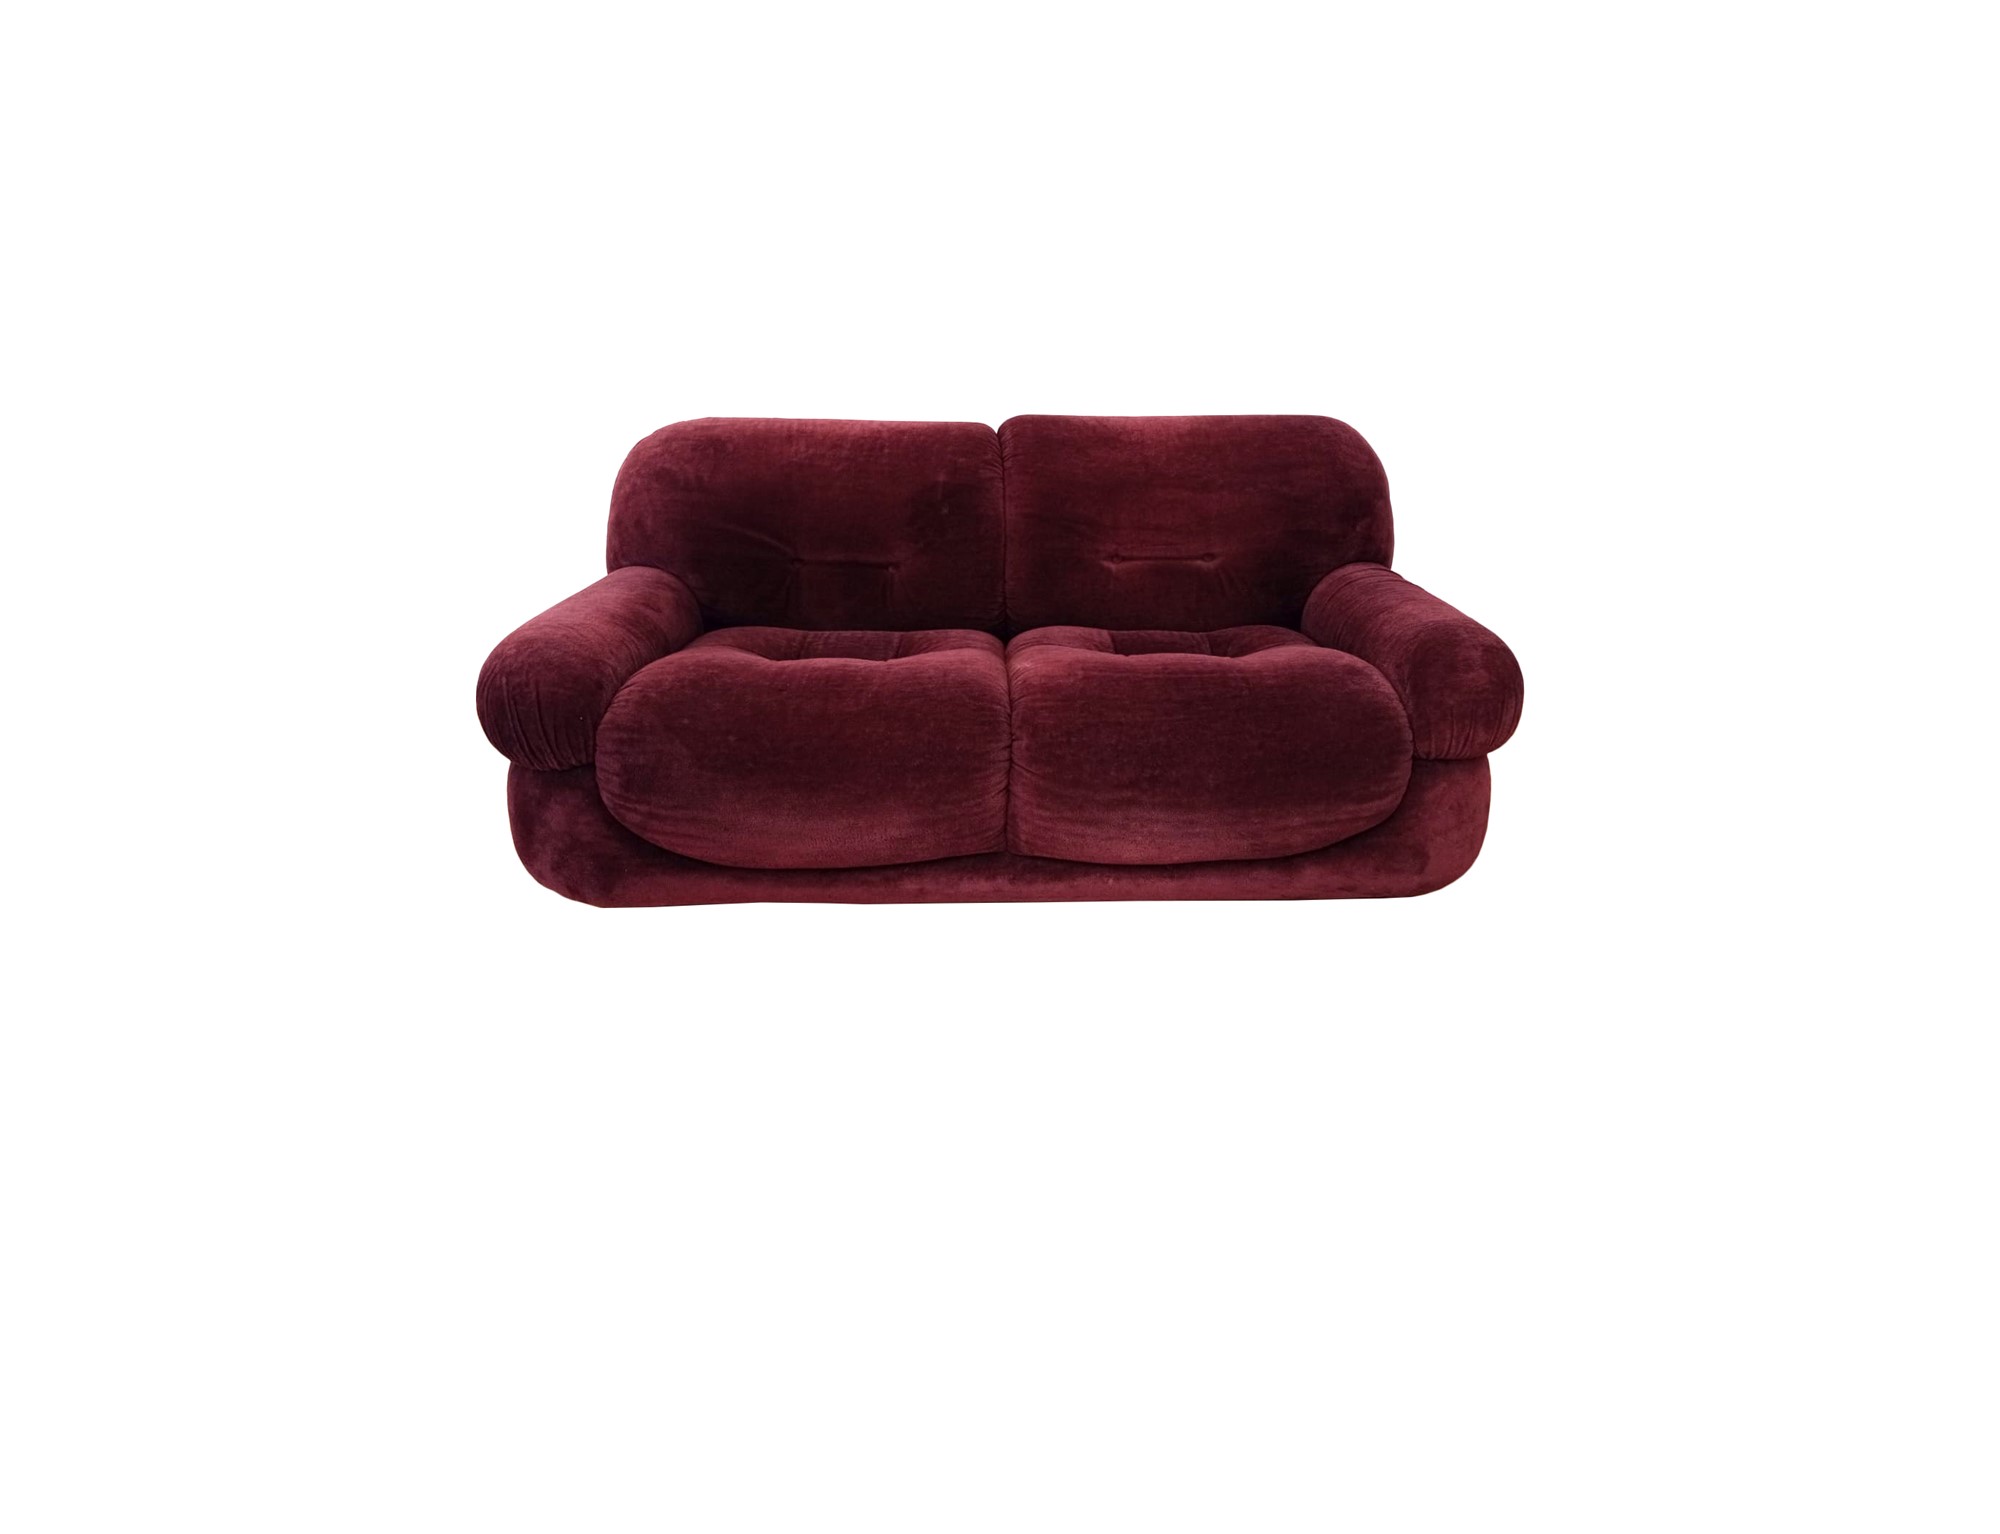 Two seater Sapporo sofa - Image 9 of 11